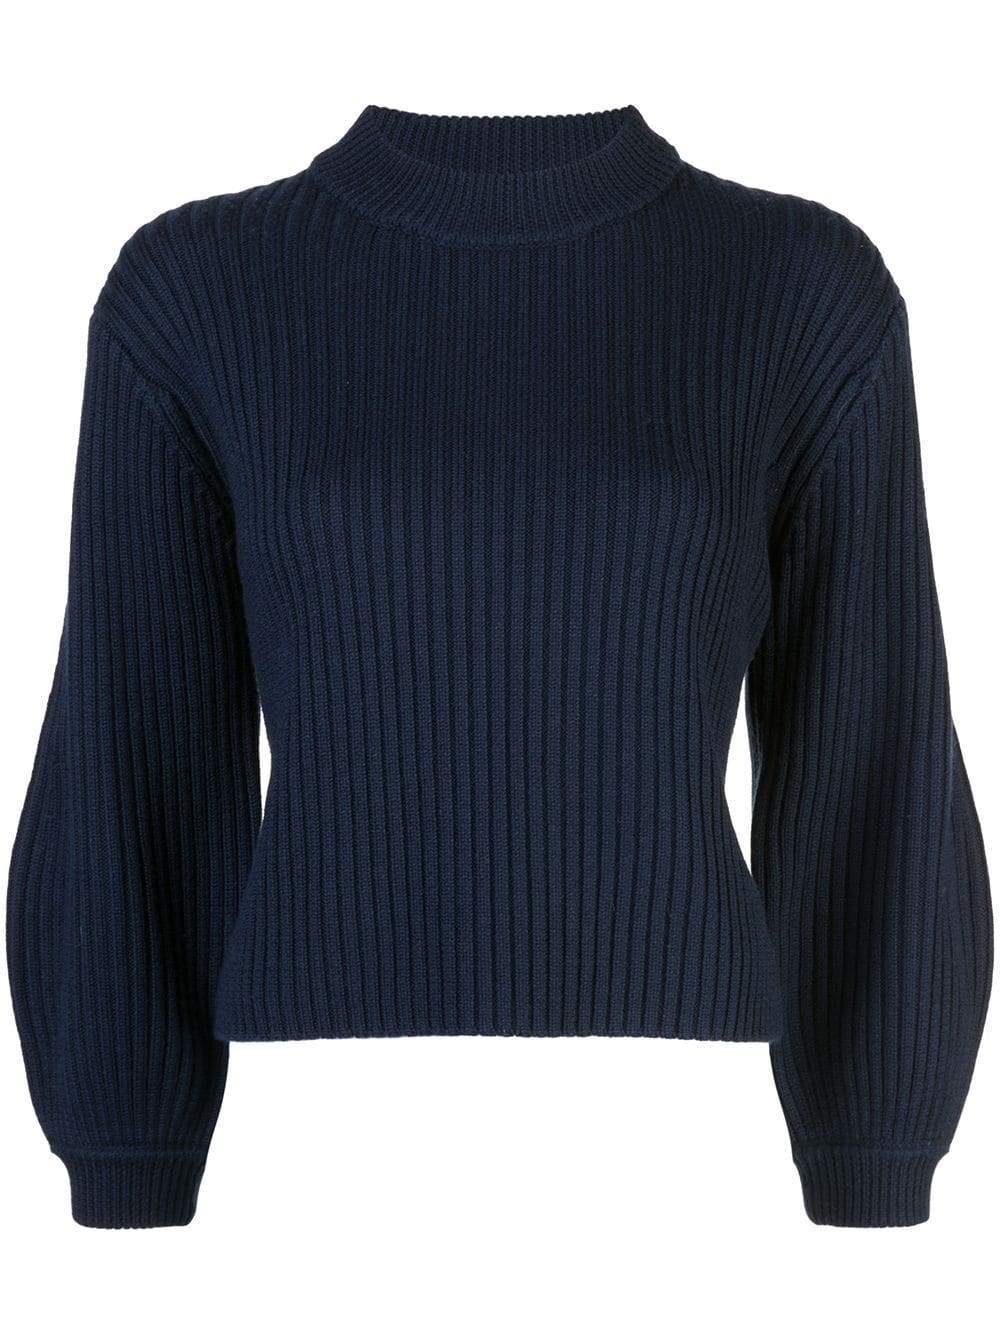 Tibi Wool Puff Sleeve Ribbed Sweater in Navy (Blue) - Lyst